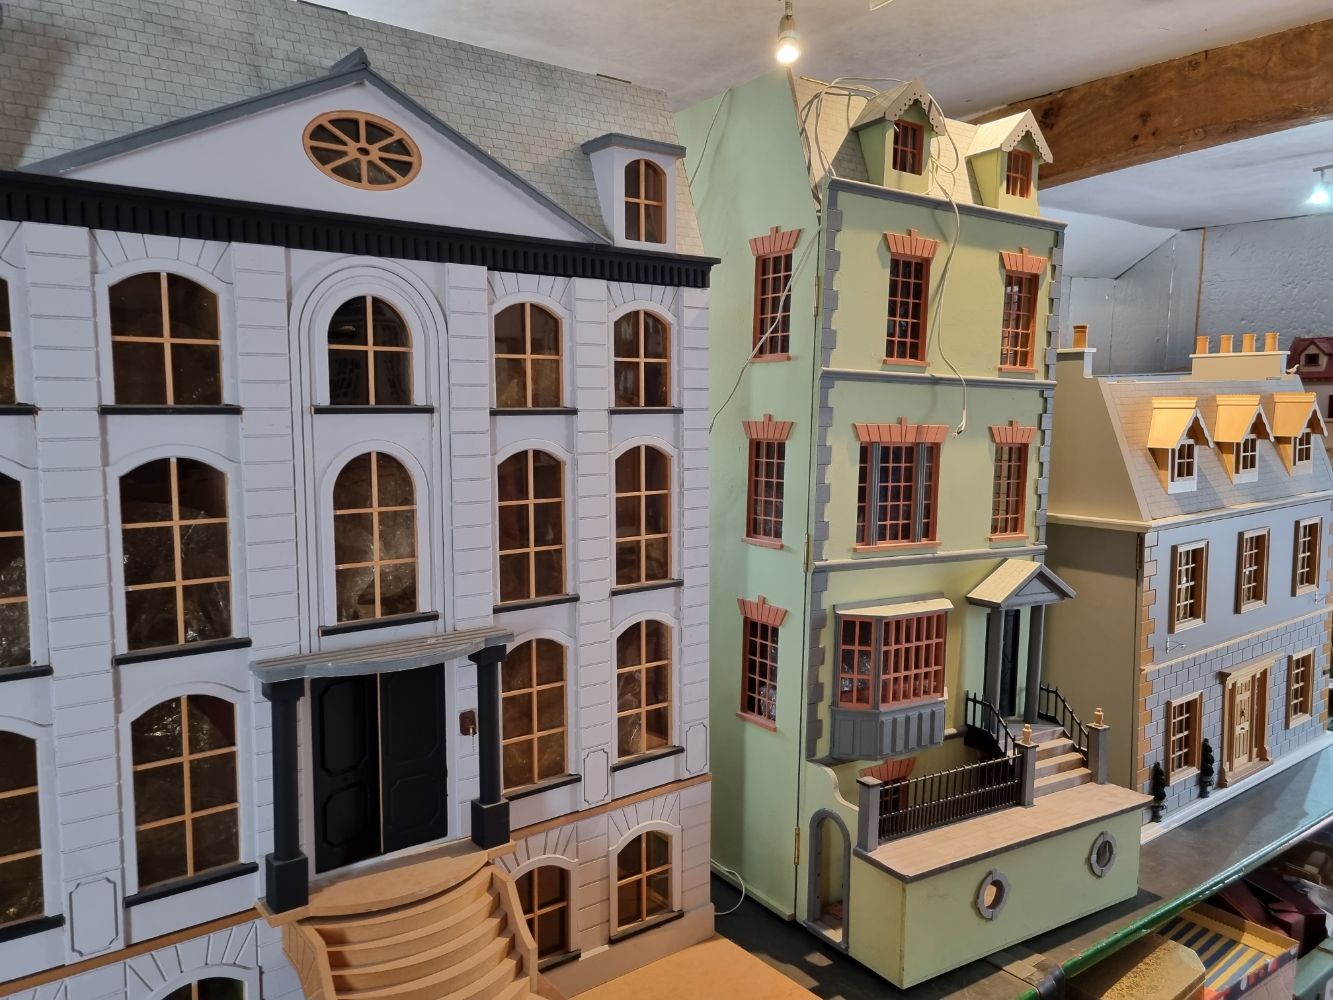 Vintage Toys & Dolls Houses including Dolls, Furniture and Accessories - Online Only Timed Auction